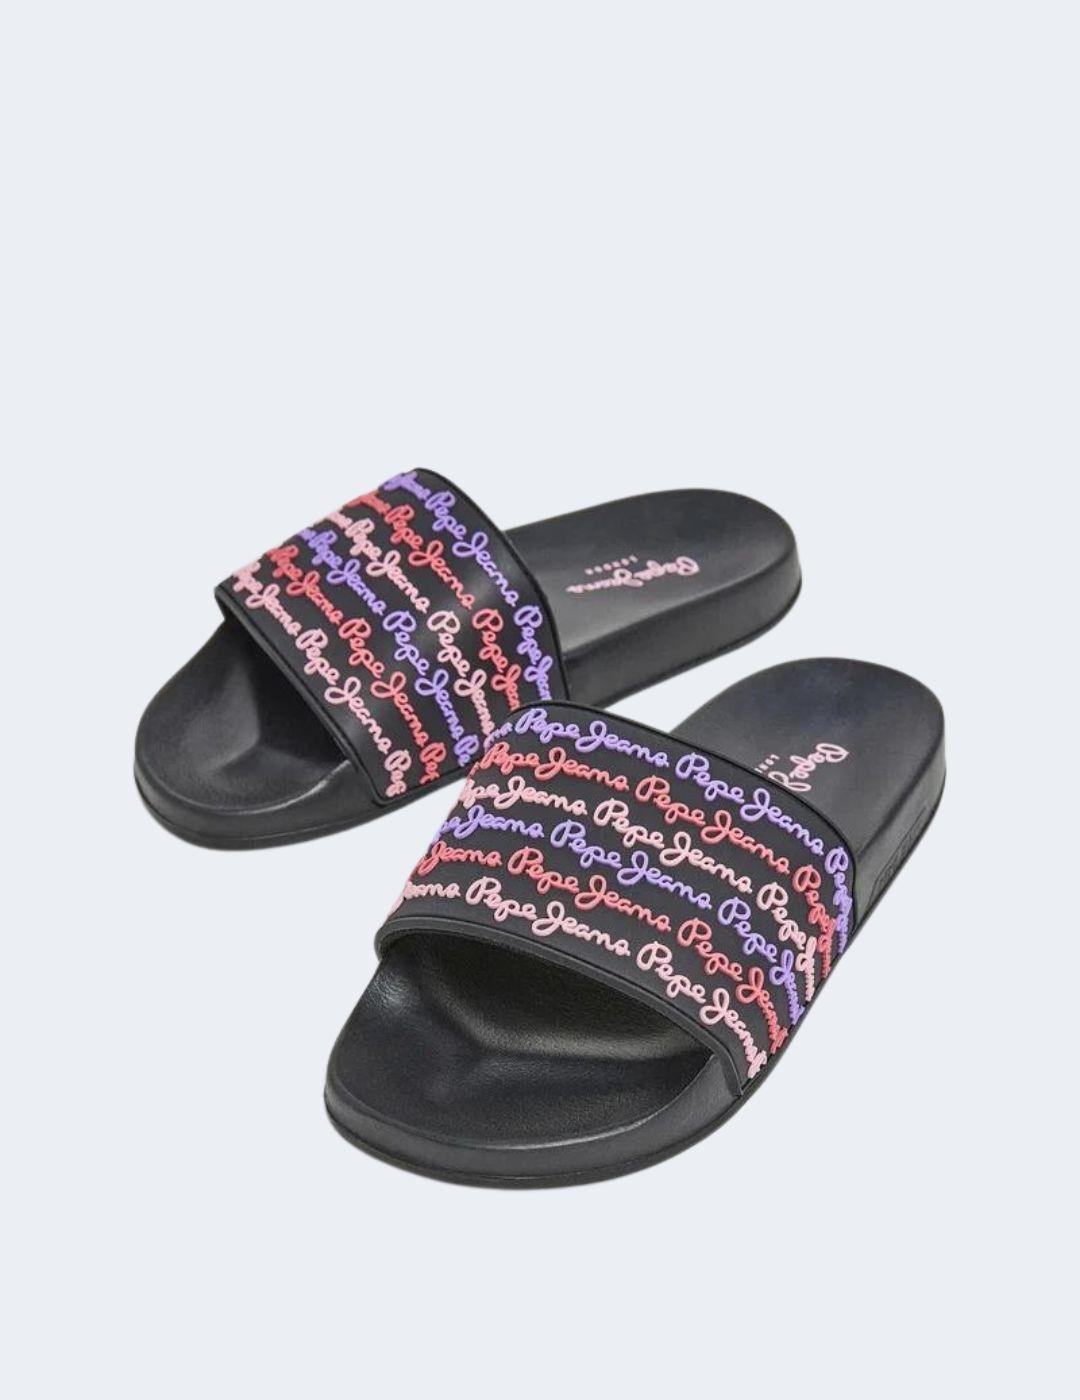 Chanclas Pepe Jeans Mujer Negras Slider Set W